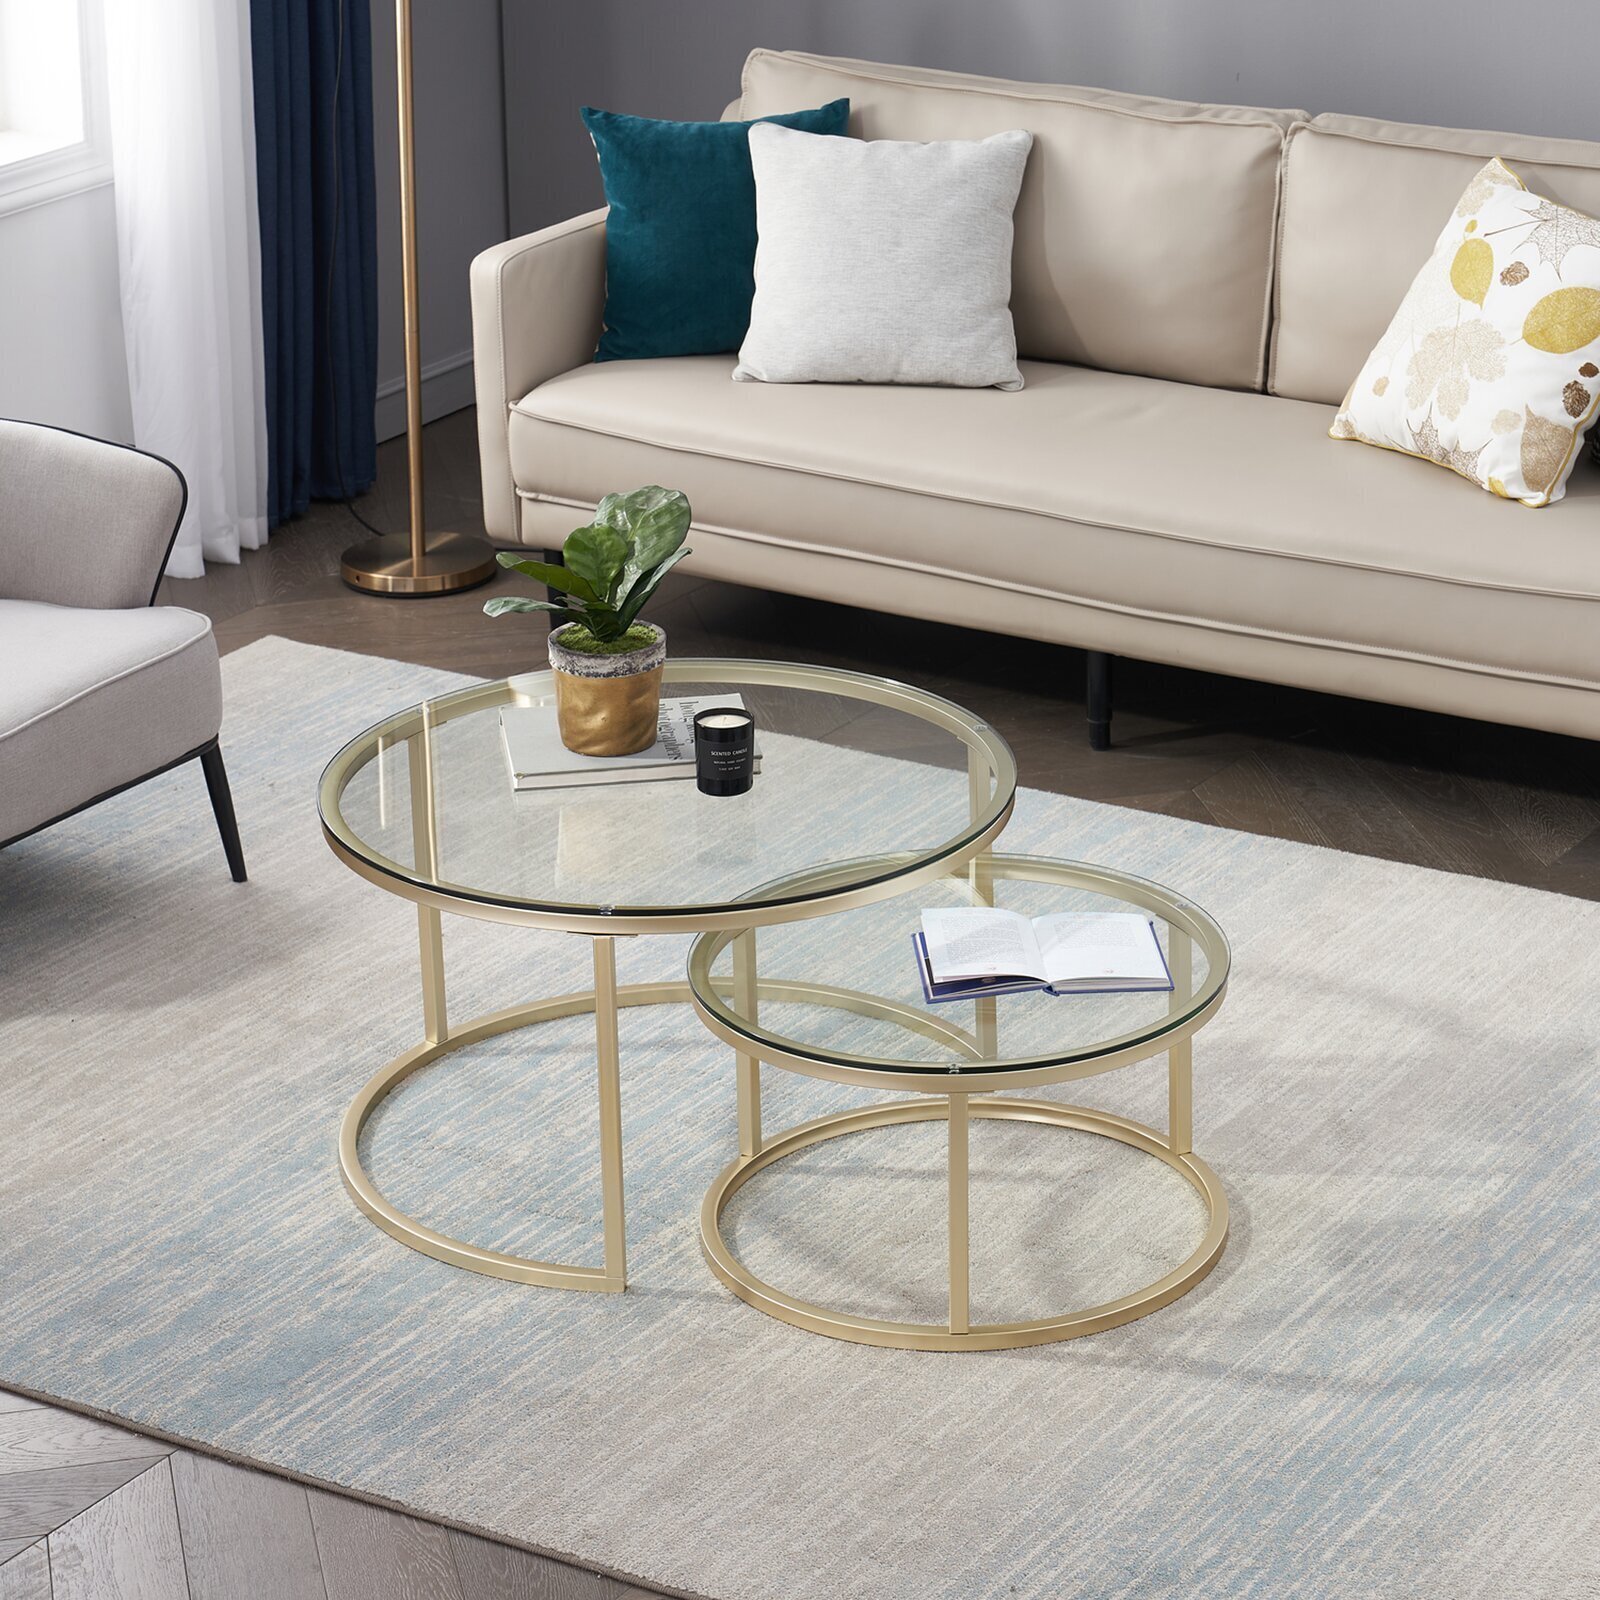 2 Nesting Glass Coffee Tables